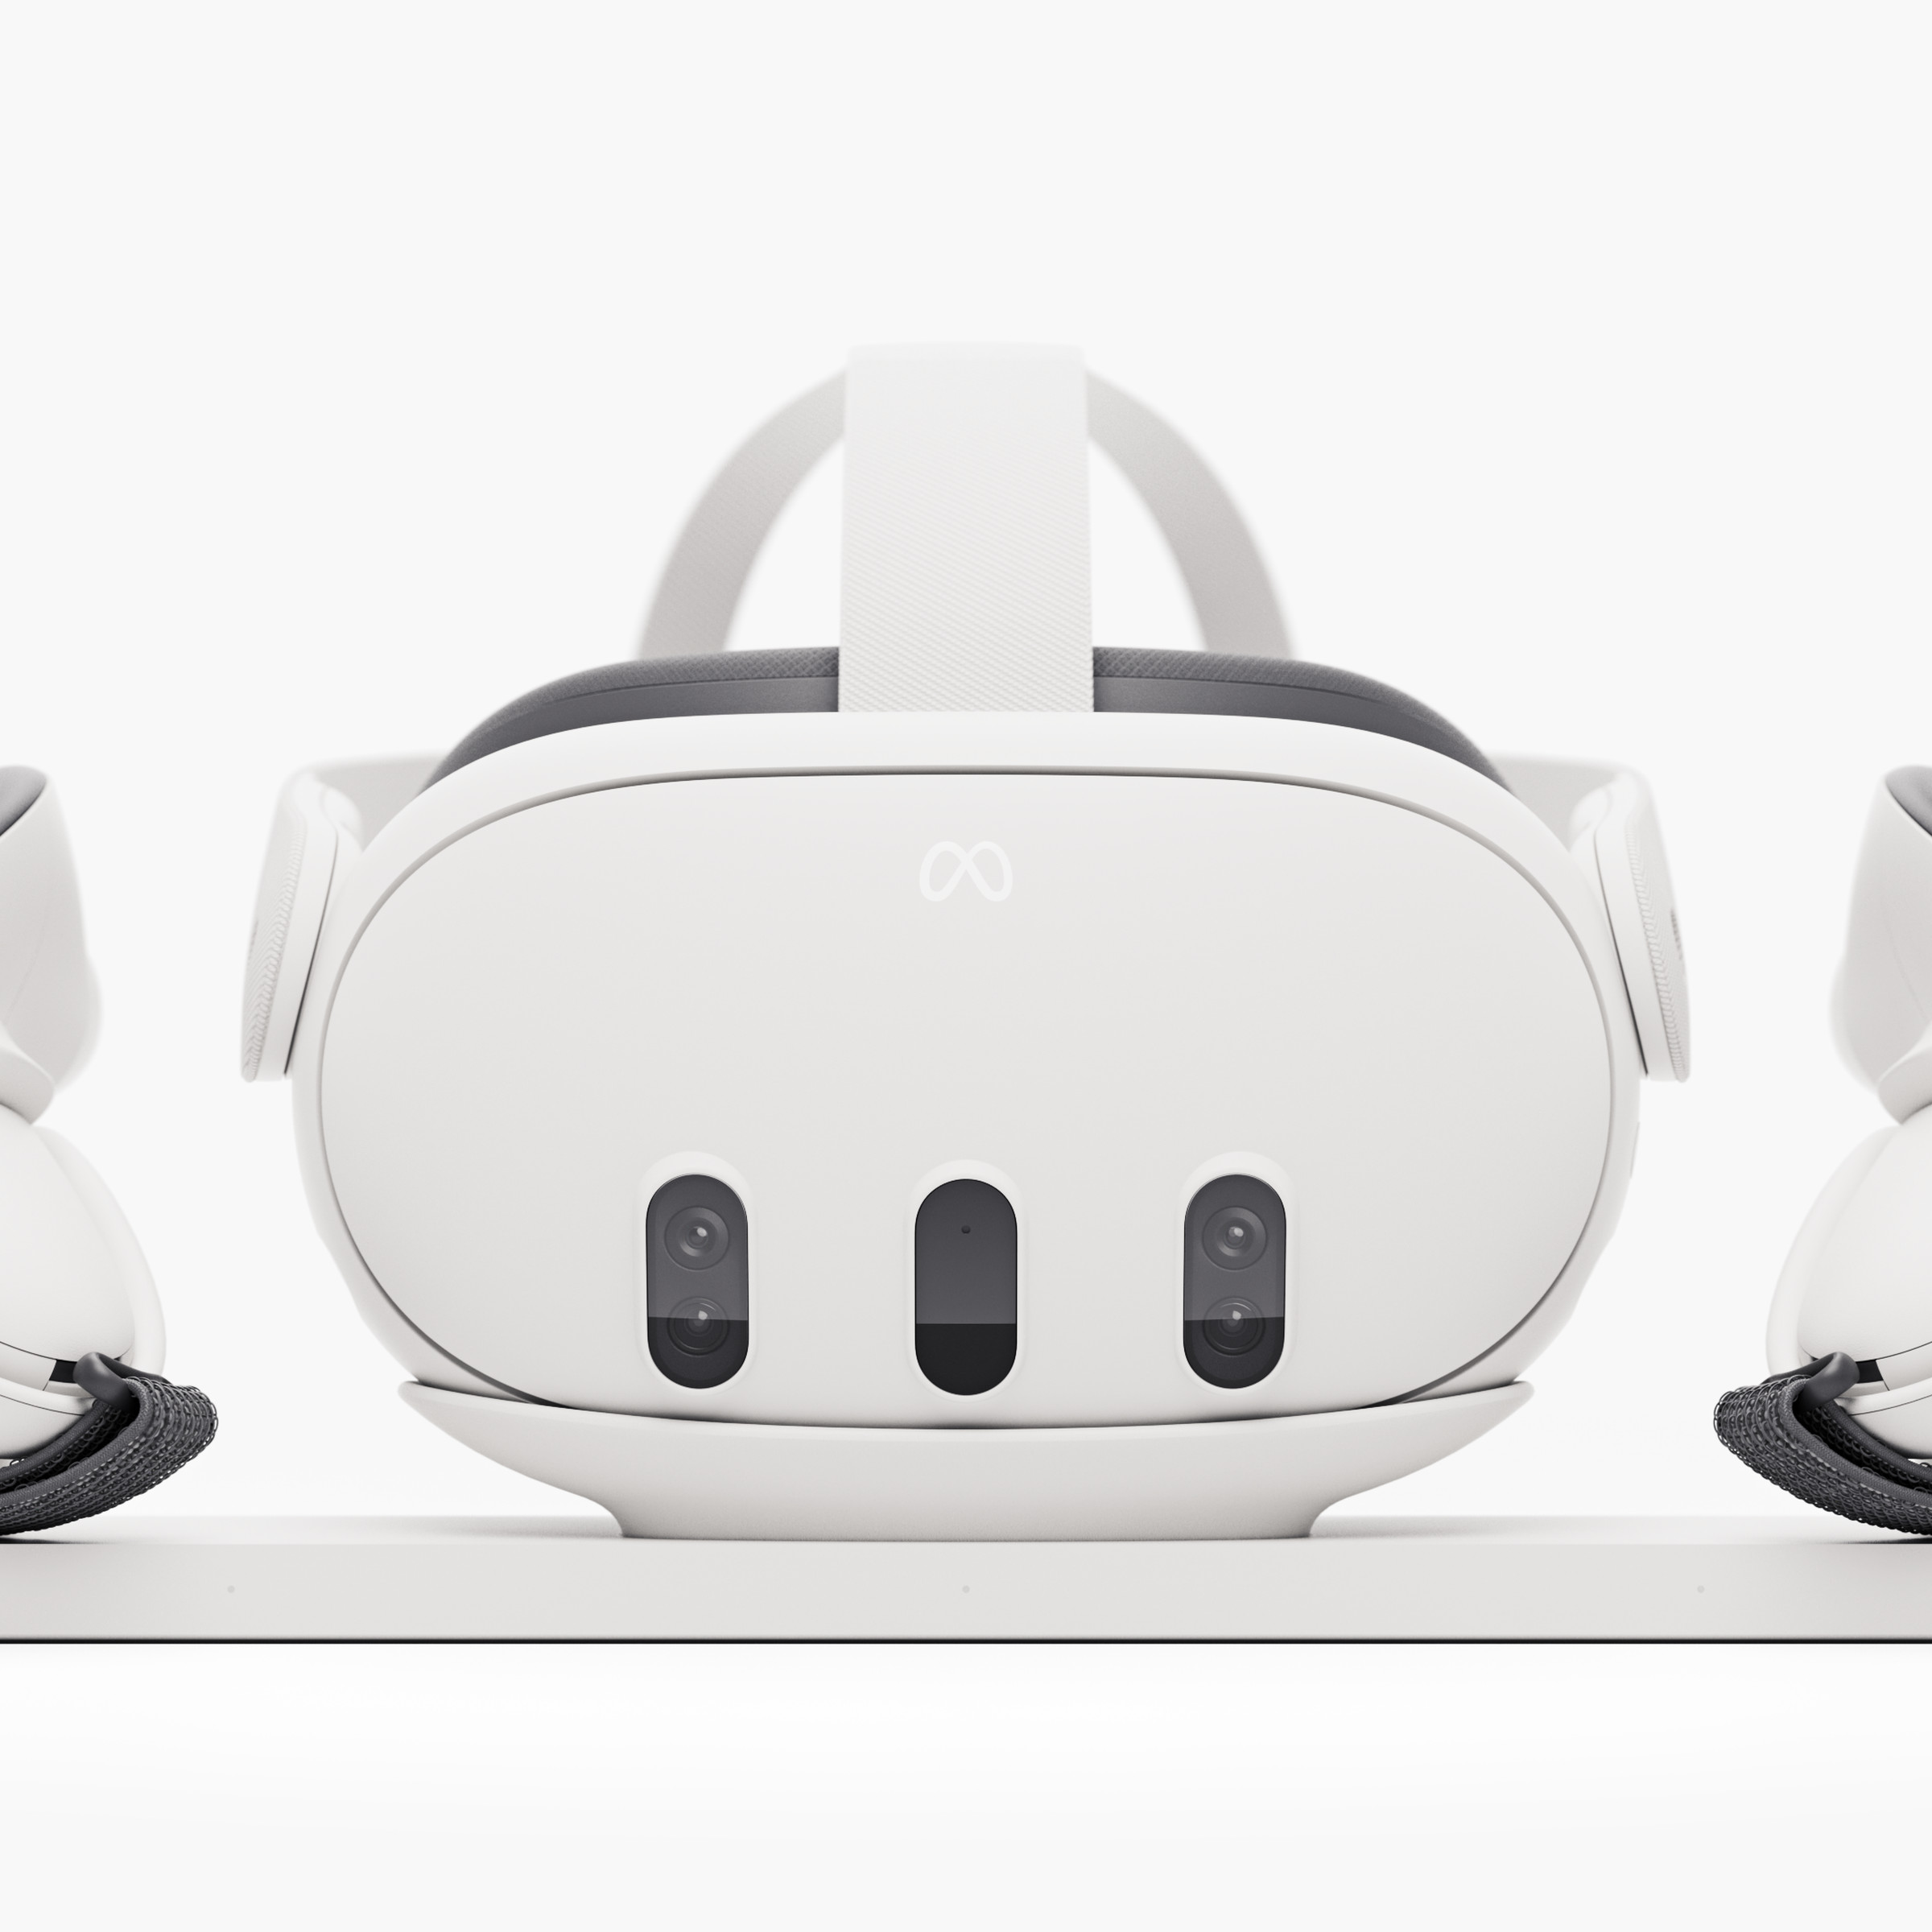 An image showing the Quest 3 headset on a charging dock